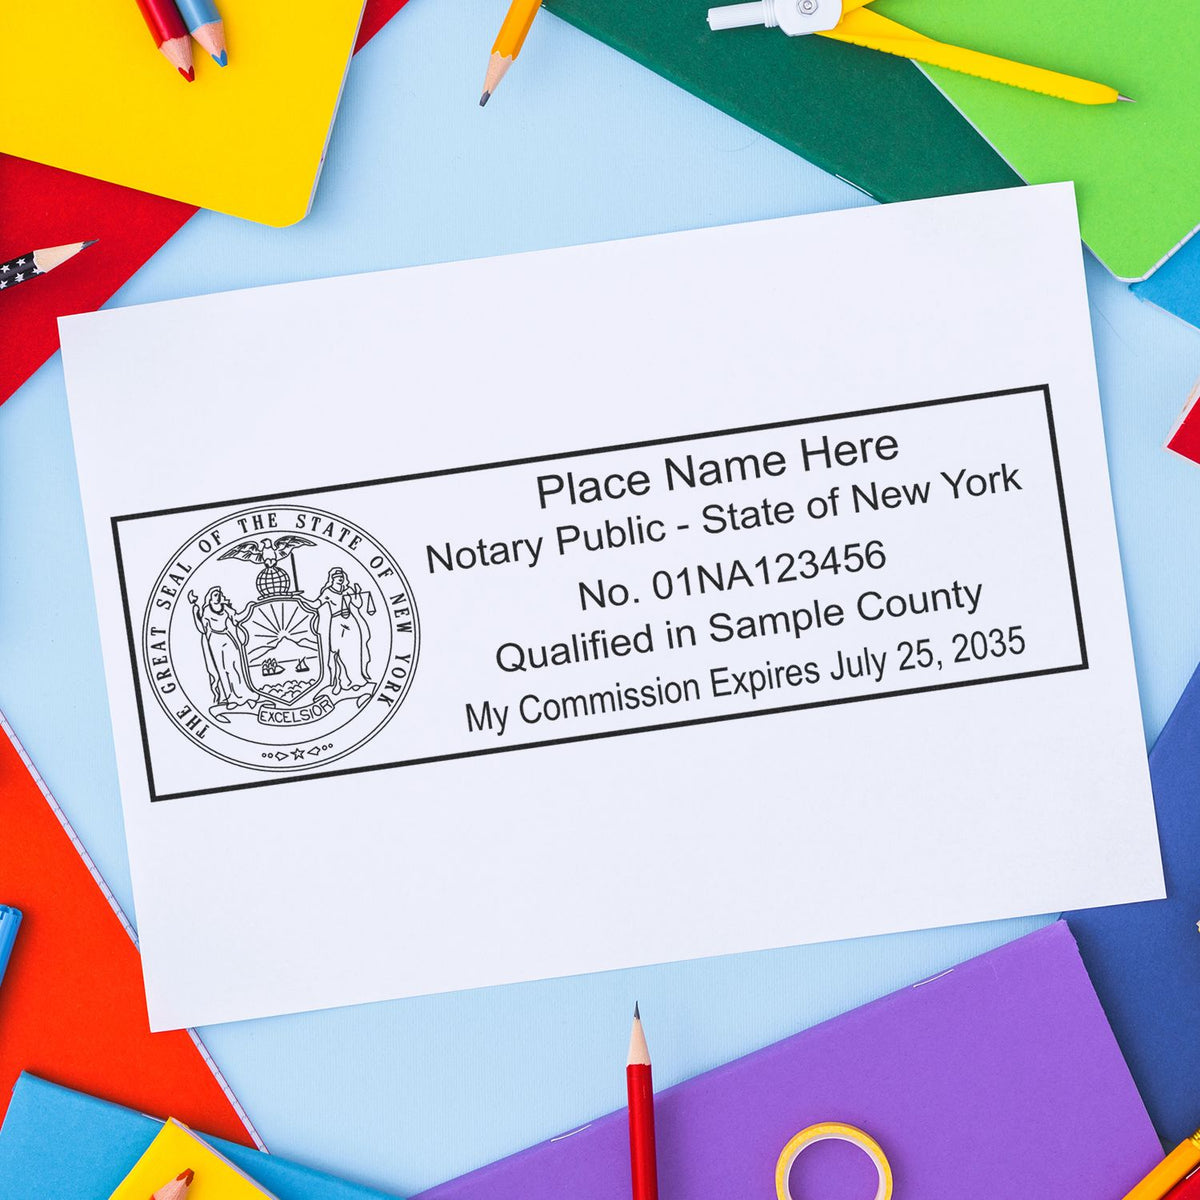 A photograph of the Wooden Handle New York State Seal Notary Public Stamp stamp impression reveals a vivid, professional image of the on paper.